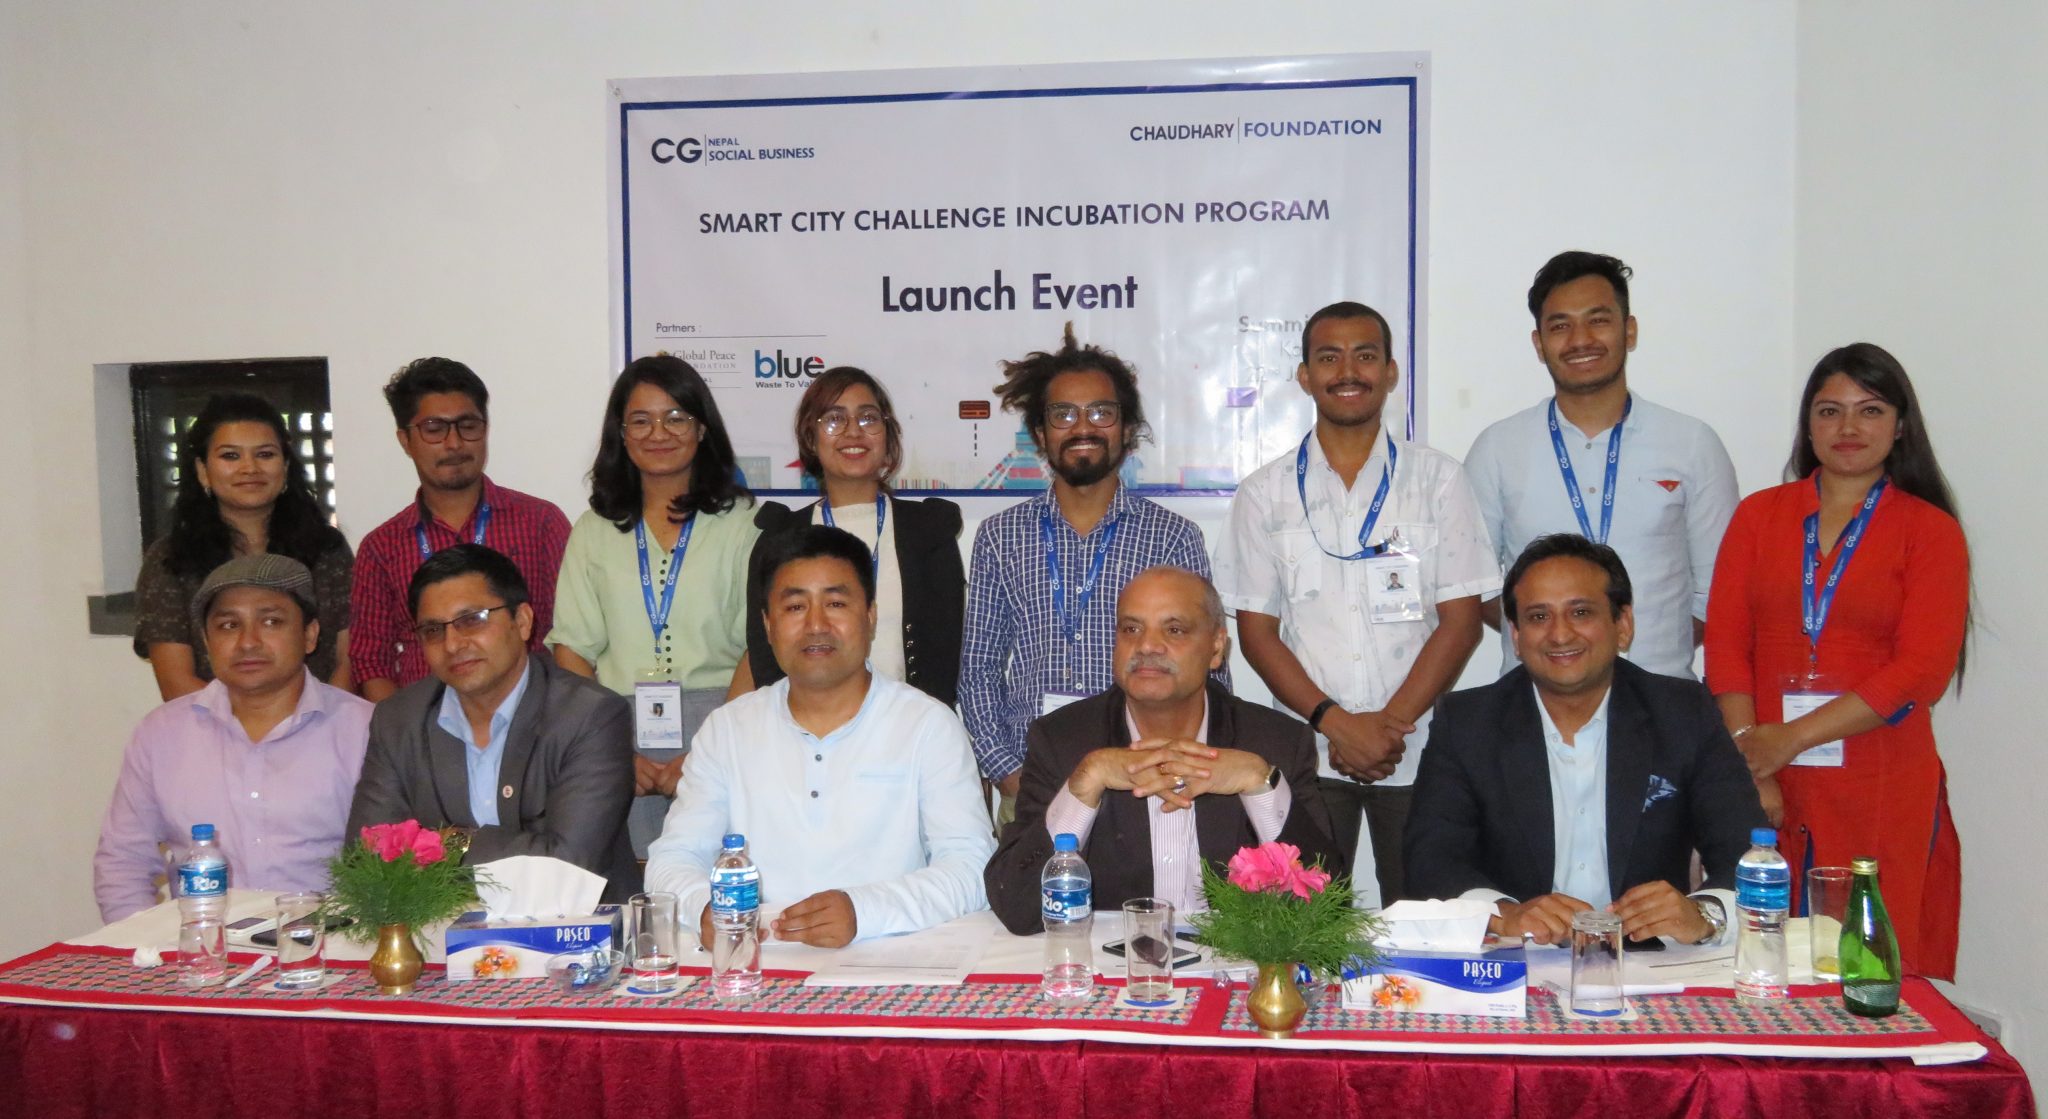 Smart City Challenge by CG kicks off with Incubation program